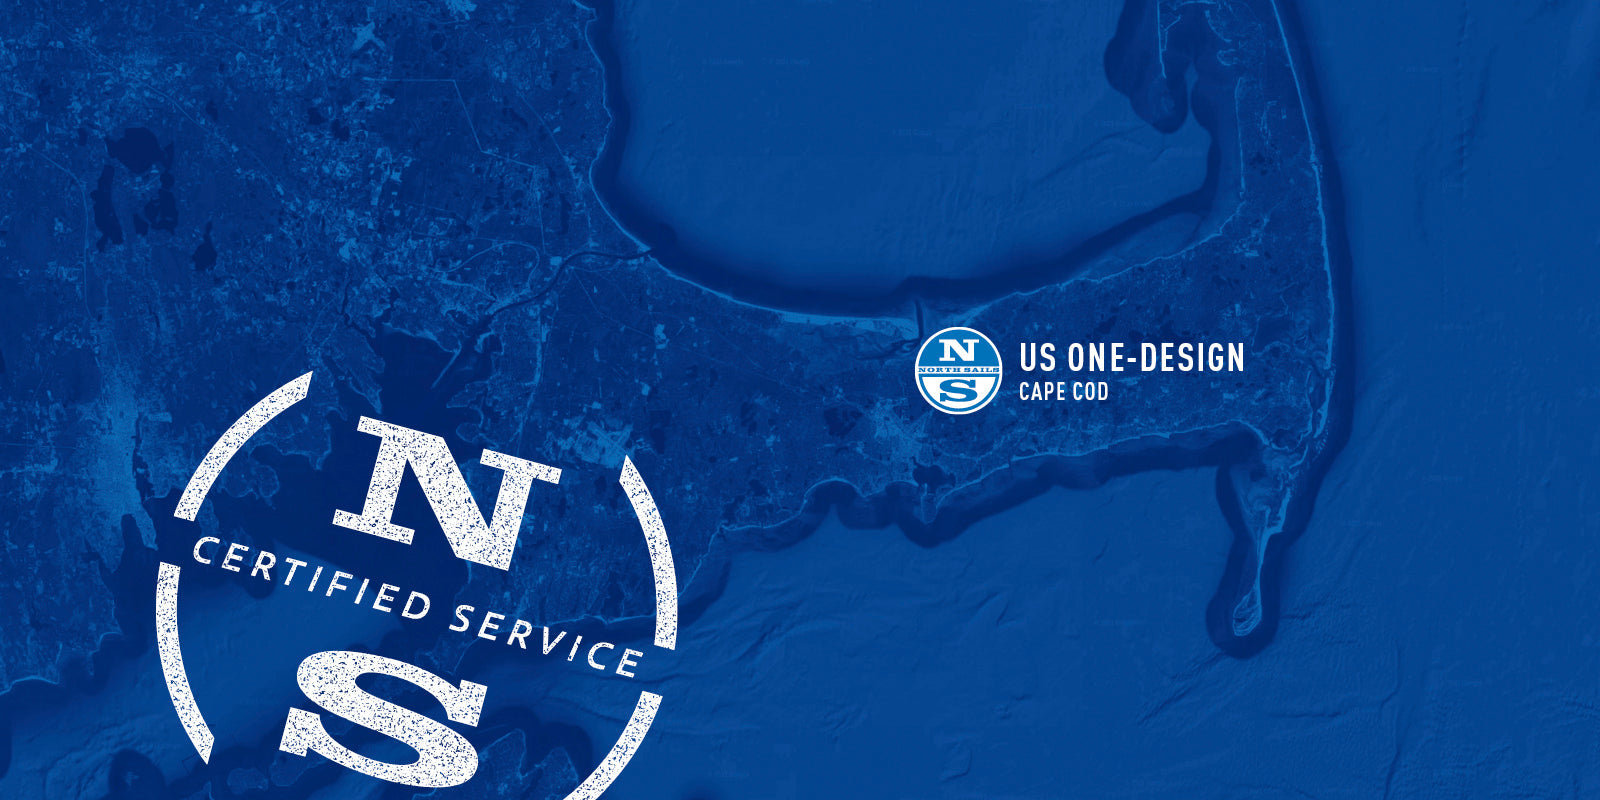 NORTH SAILS TEAMS UP WITH US ONE DESIGN